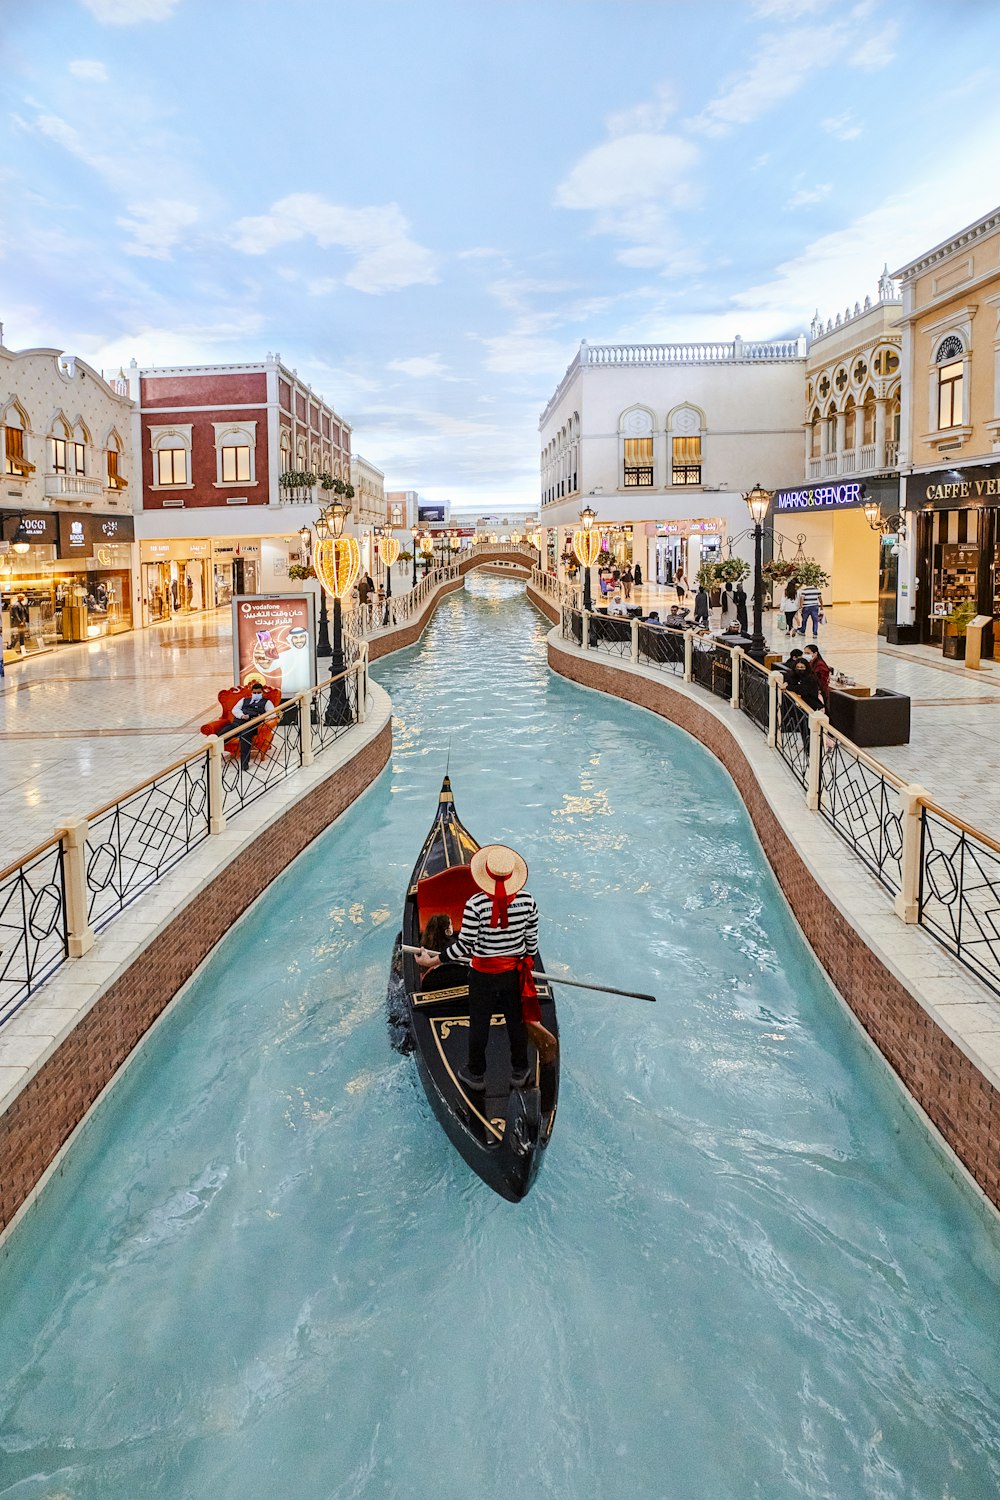 a gondola in the middle of a canal in a shopping district